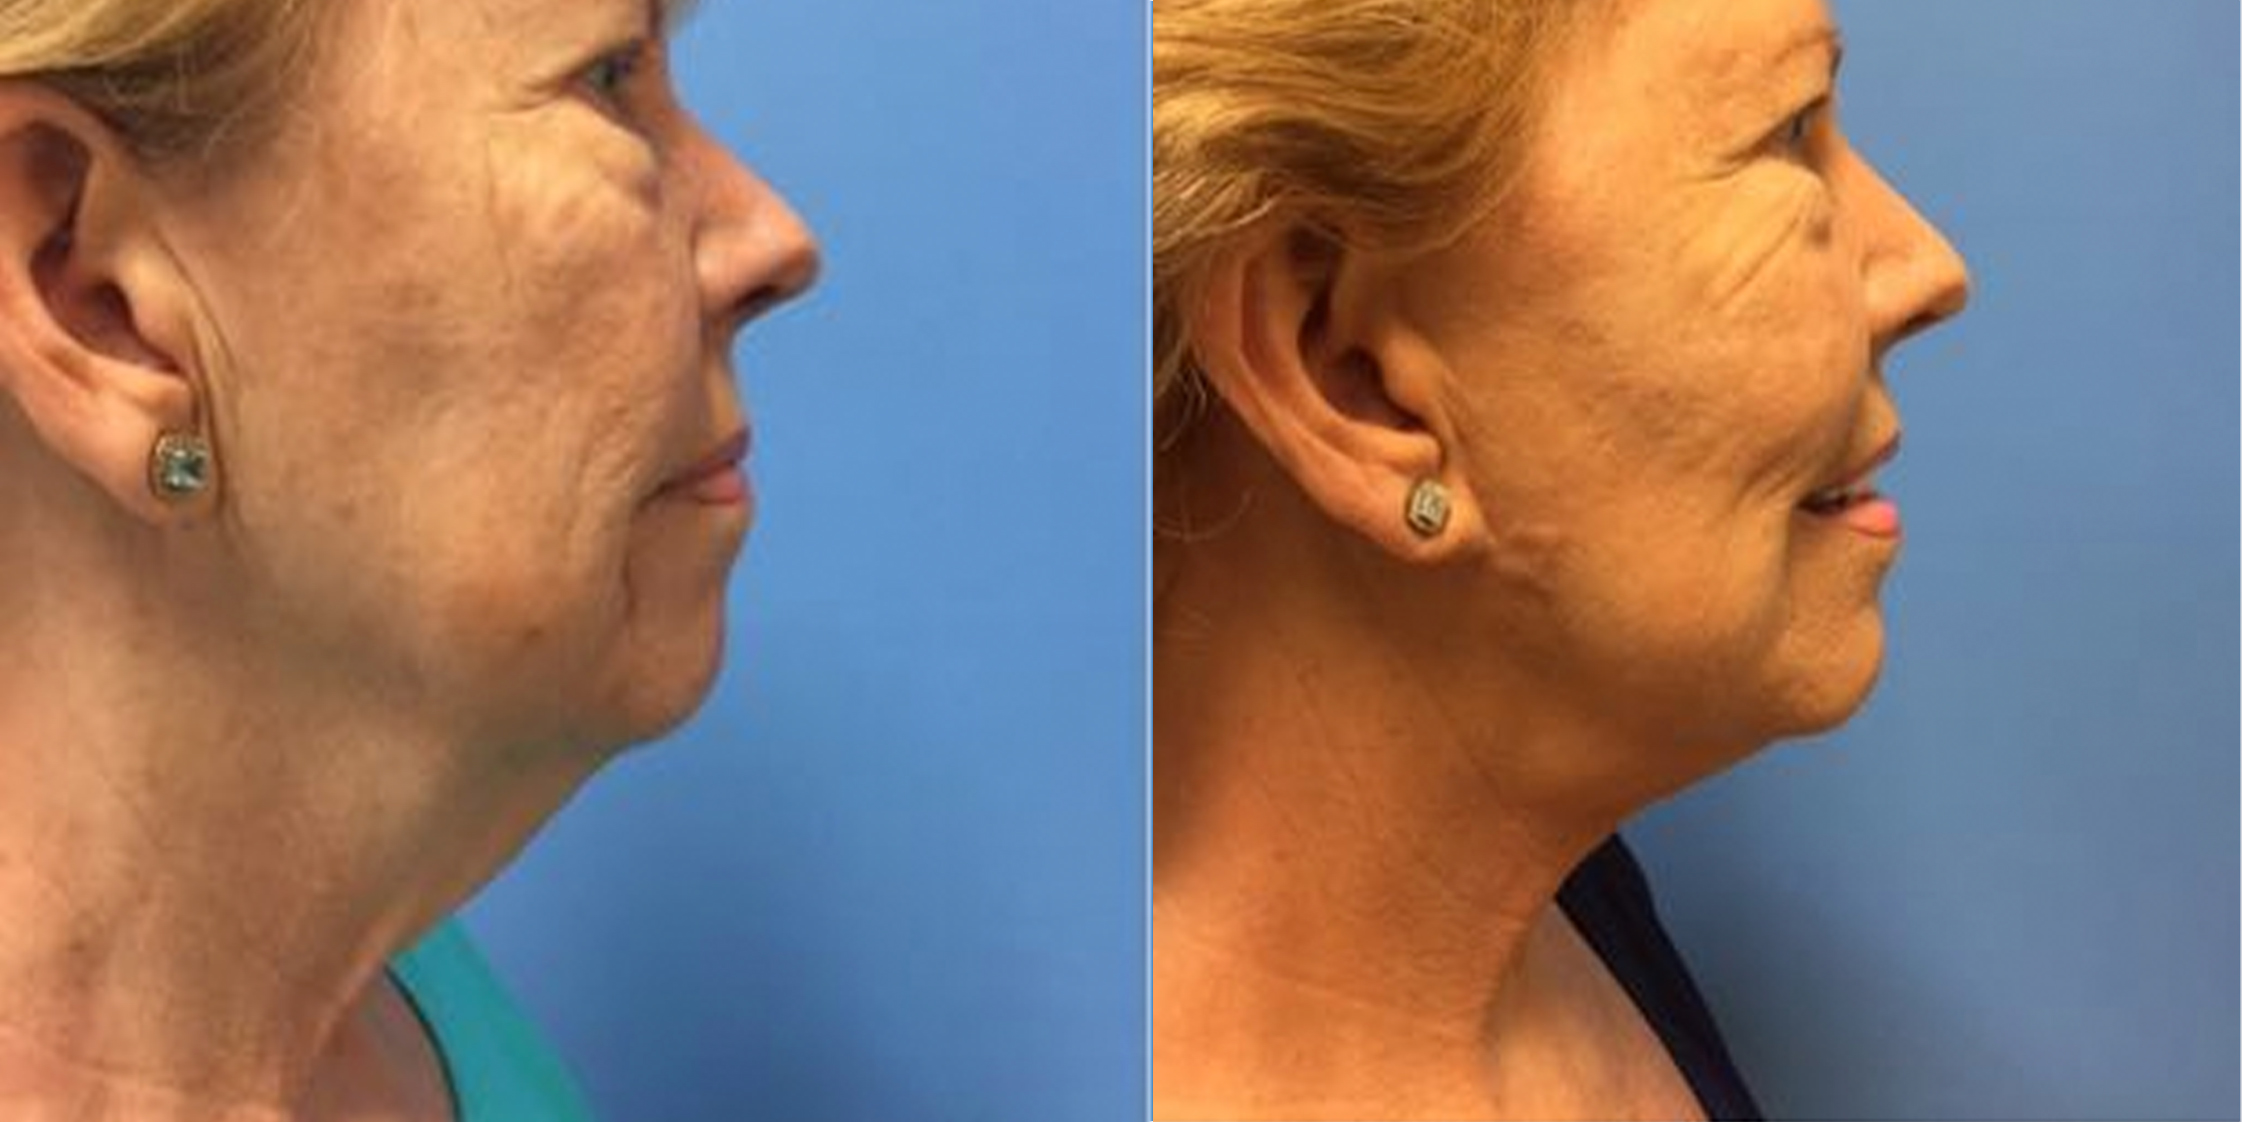 Hess-Sandeen-Facelift-Tucson-before-after10-1024x683